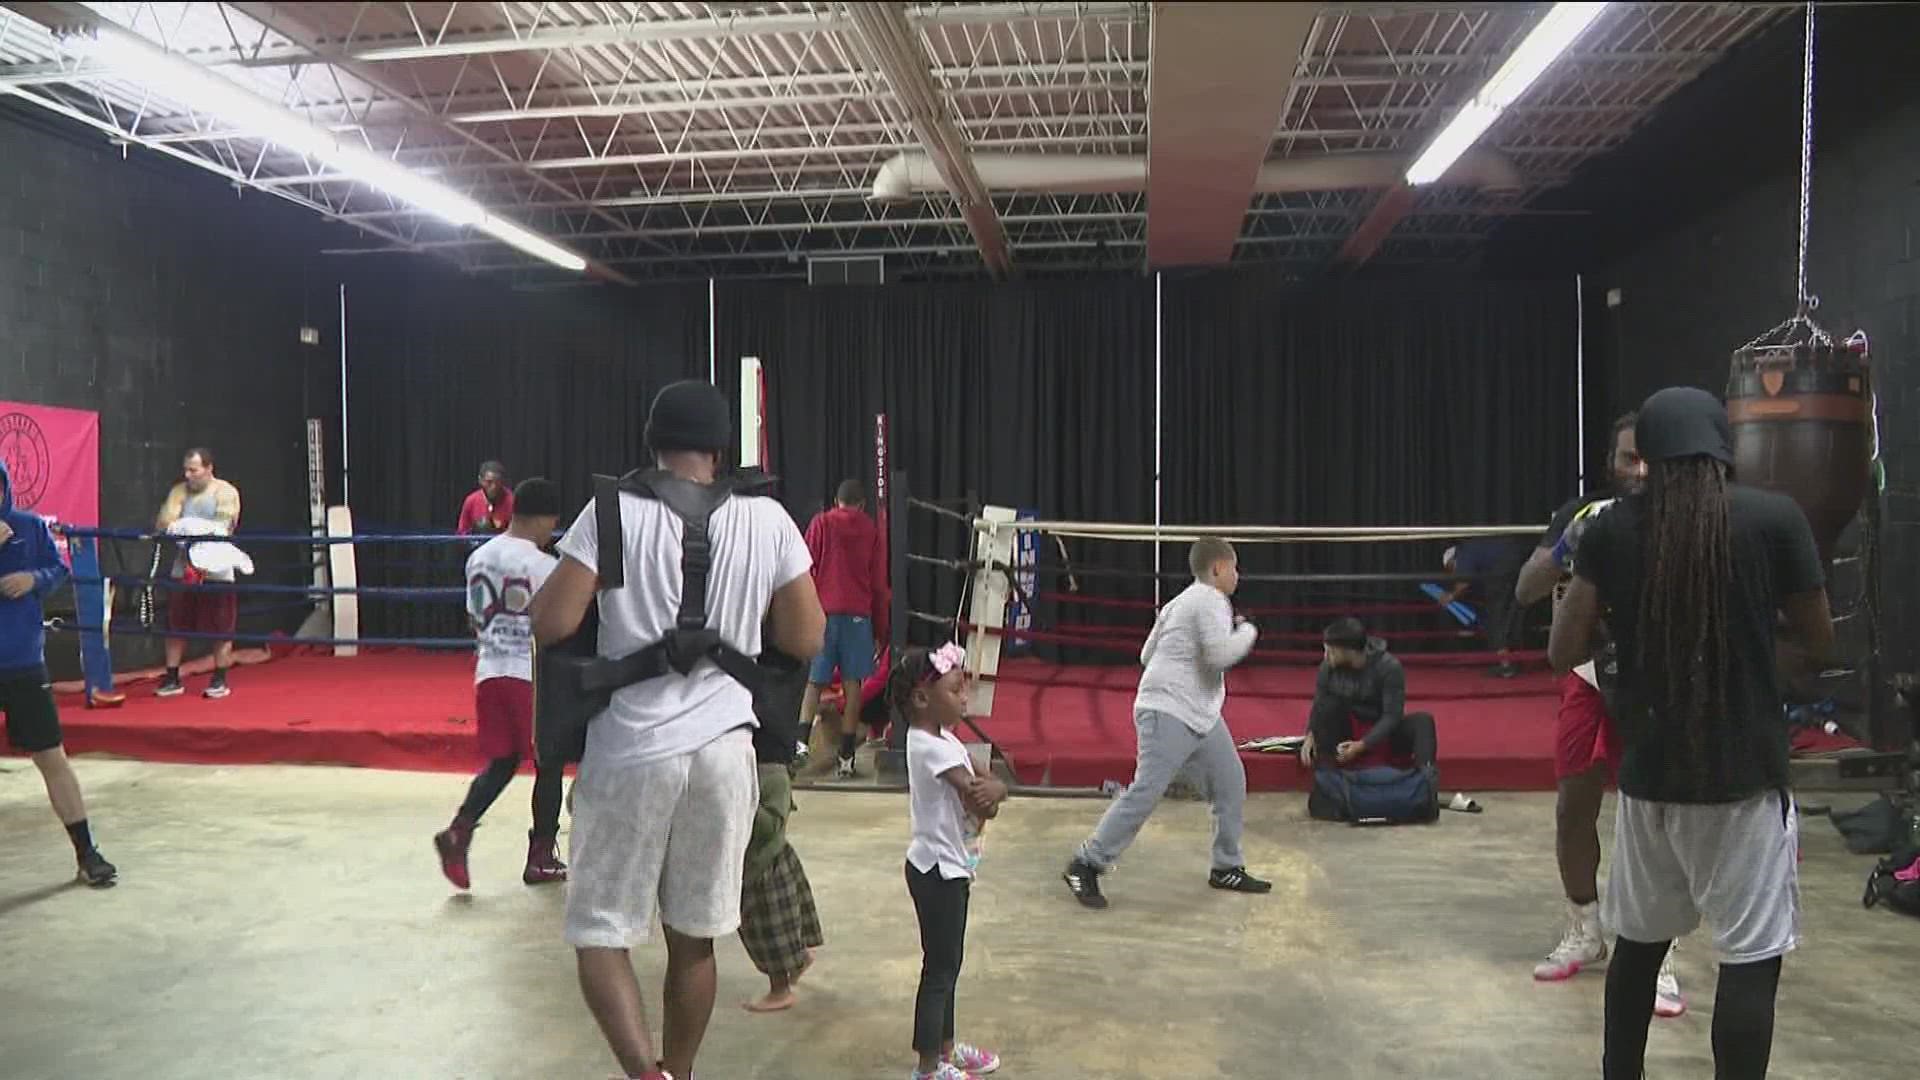 The boxing gym is designed to keep young people focused and out of trouble. One participant found a home there after losing everything in Hurricane Ida.